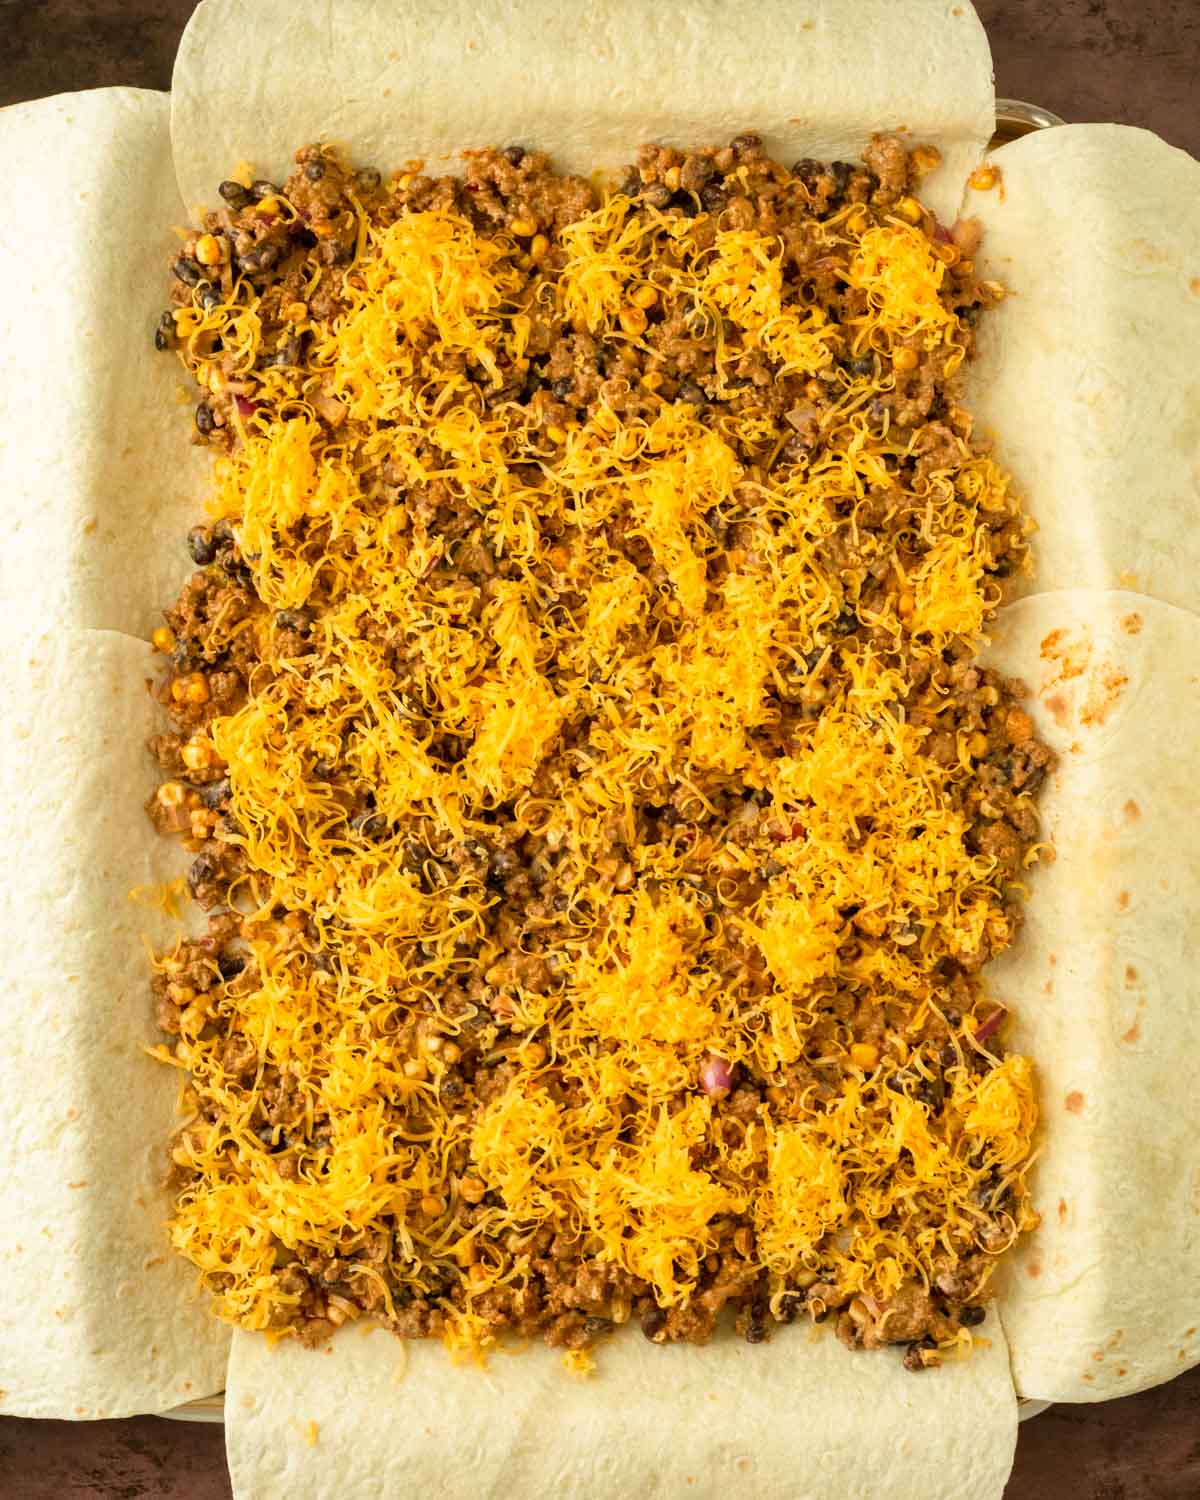 Step 6. Layer the cheese and taco meat on the tortillas